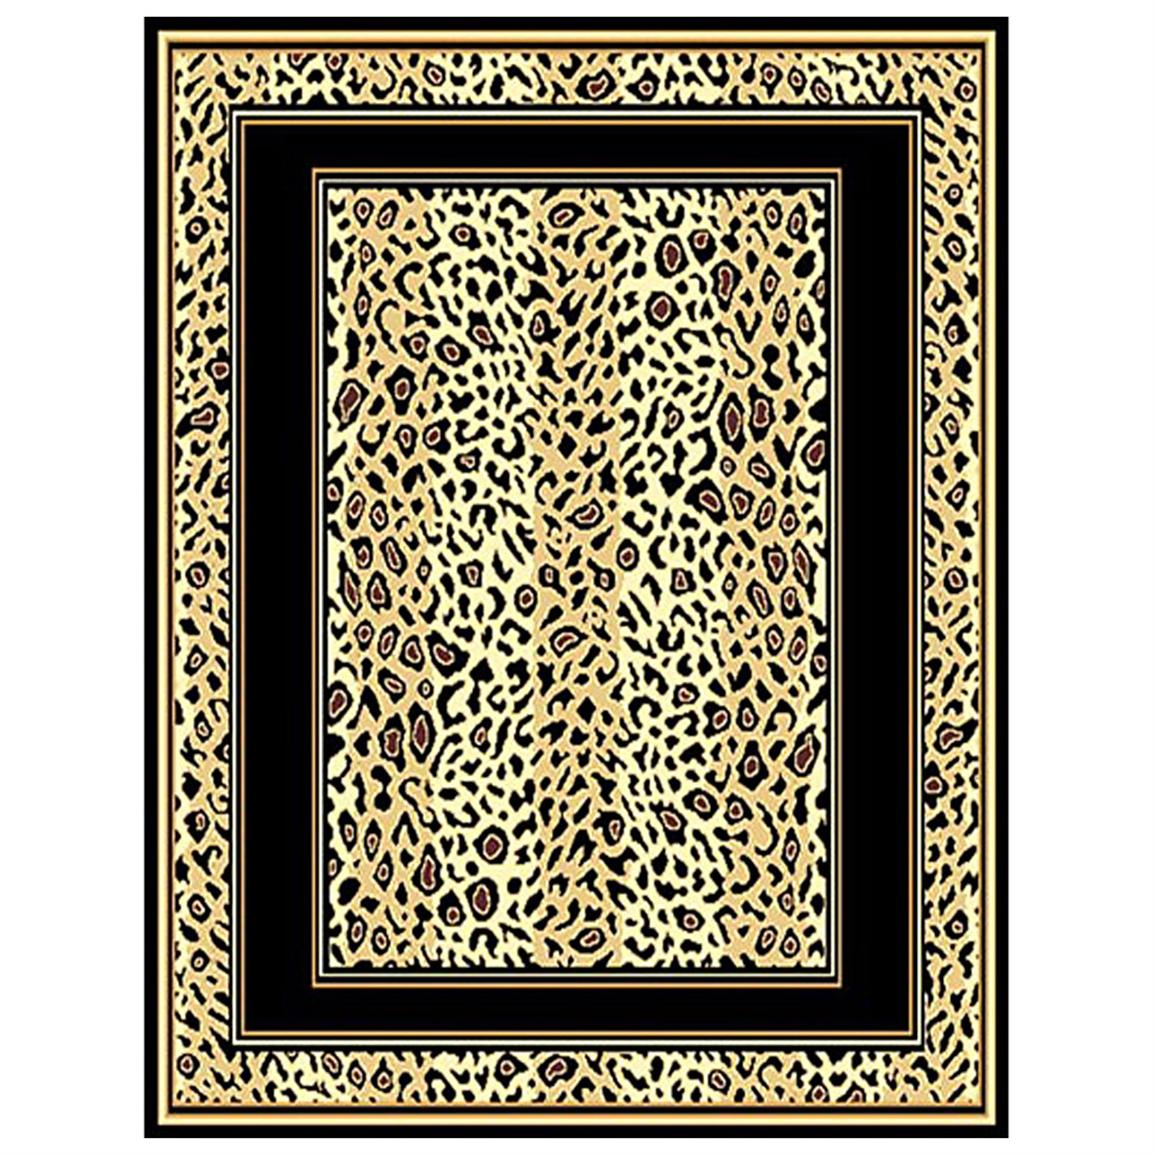 Leopard Print Border Area Rug - 226523, Rugs at Sportsman's Guide